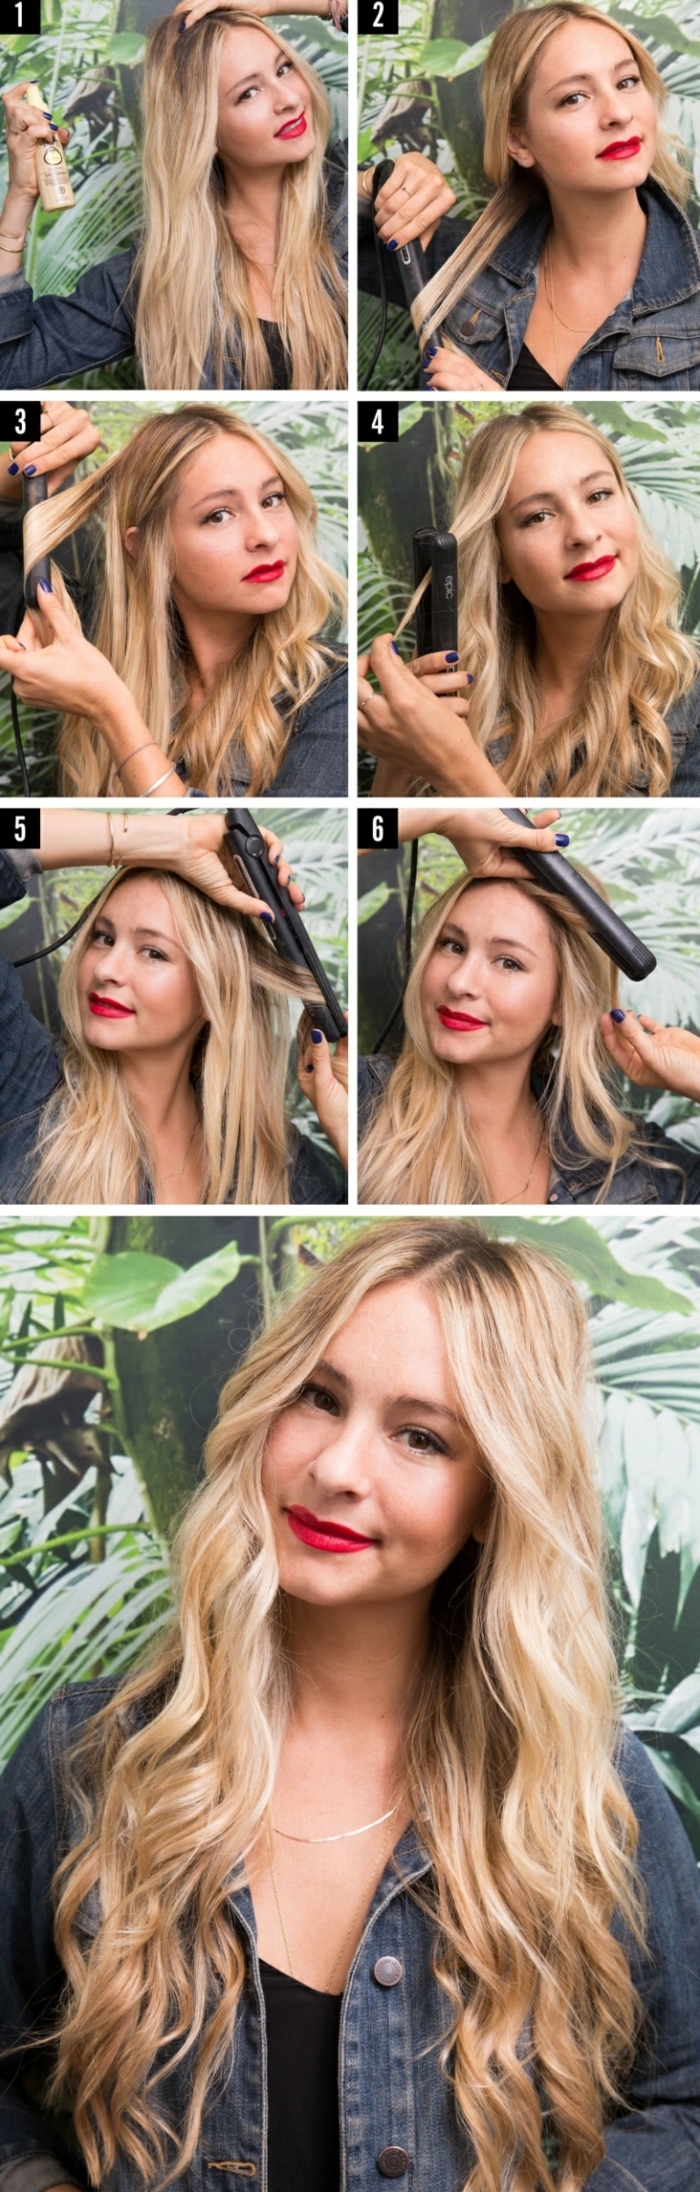 How to curl your hair tutorial-denim-jacket-black-tank-top-red-lips